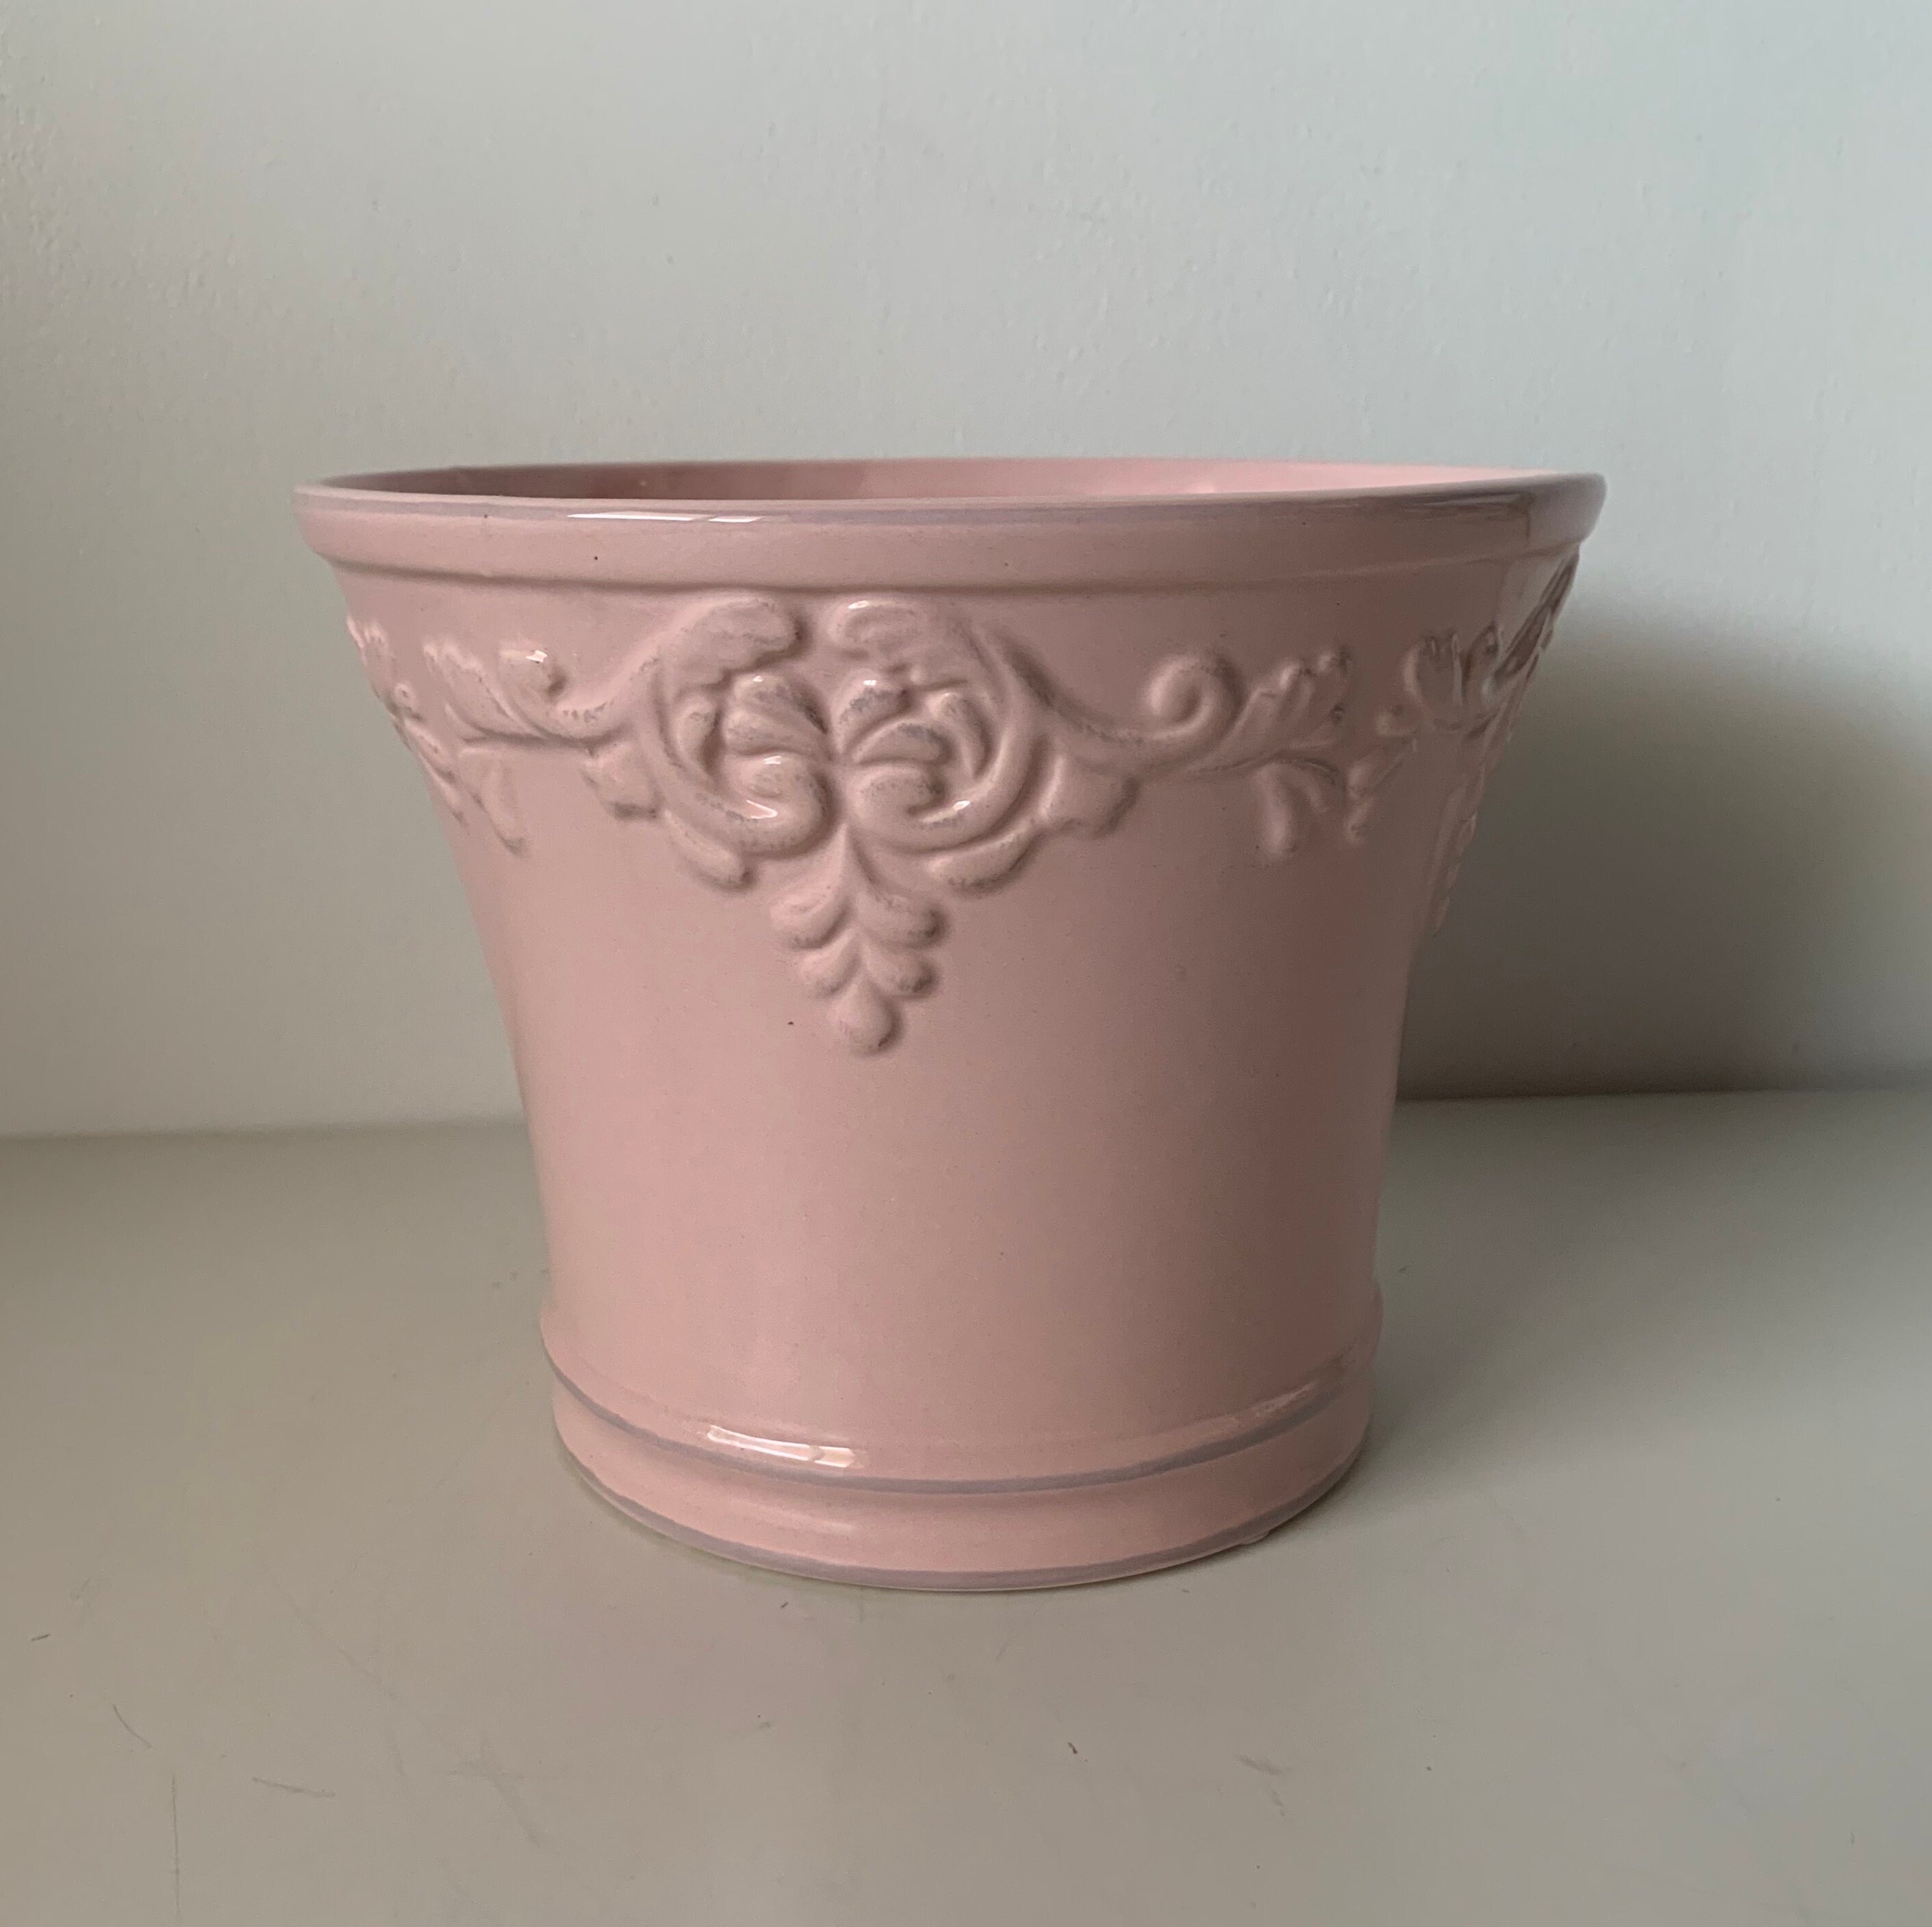 Vintage Terra-cotta Clay Pot, 4.5 Inches, Flower Pot Planter, Vintage,  Natural Patina, Clay Pot, Shabby Chic, She Shed 